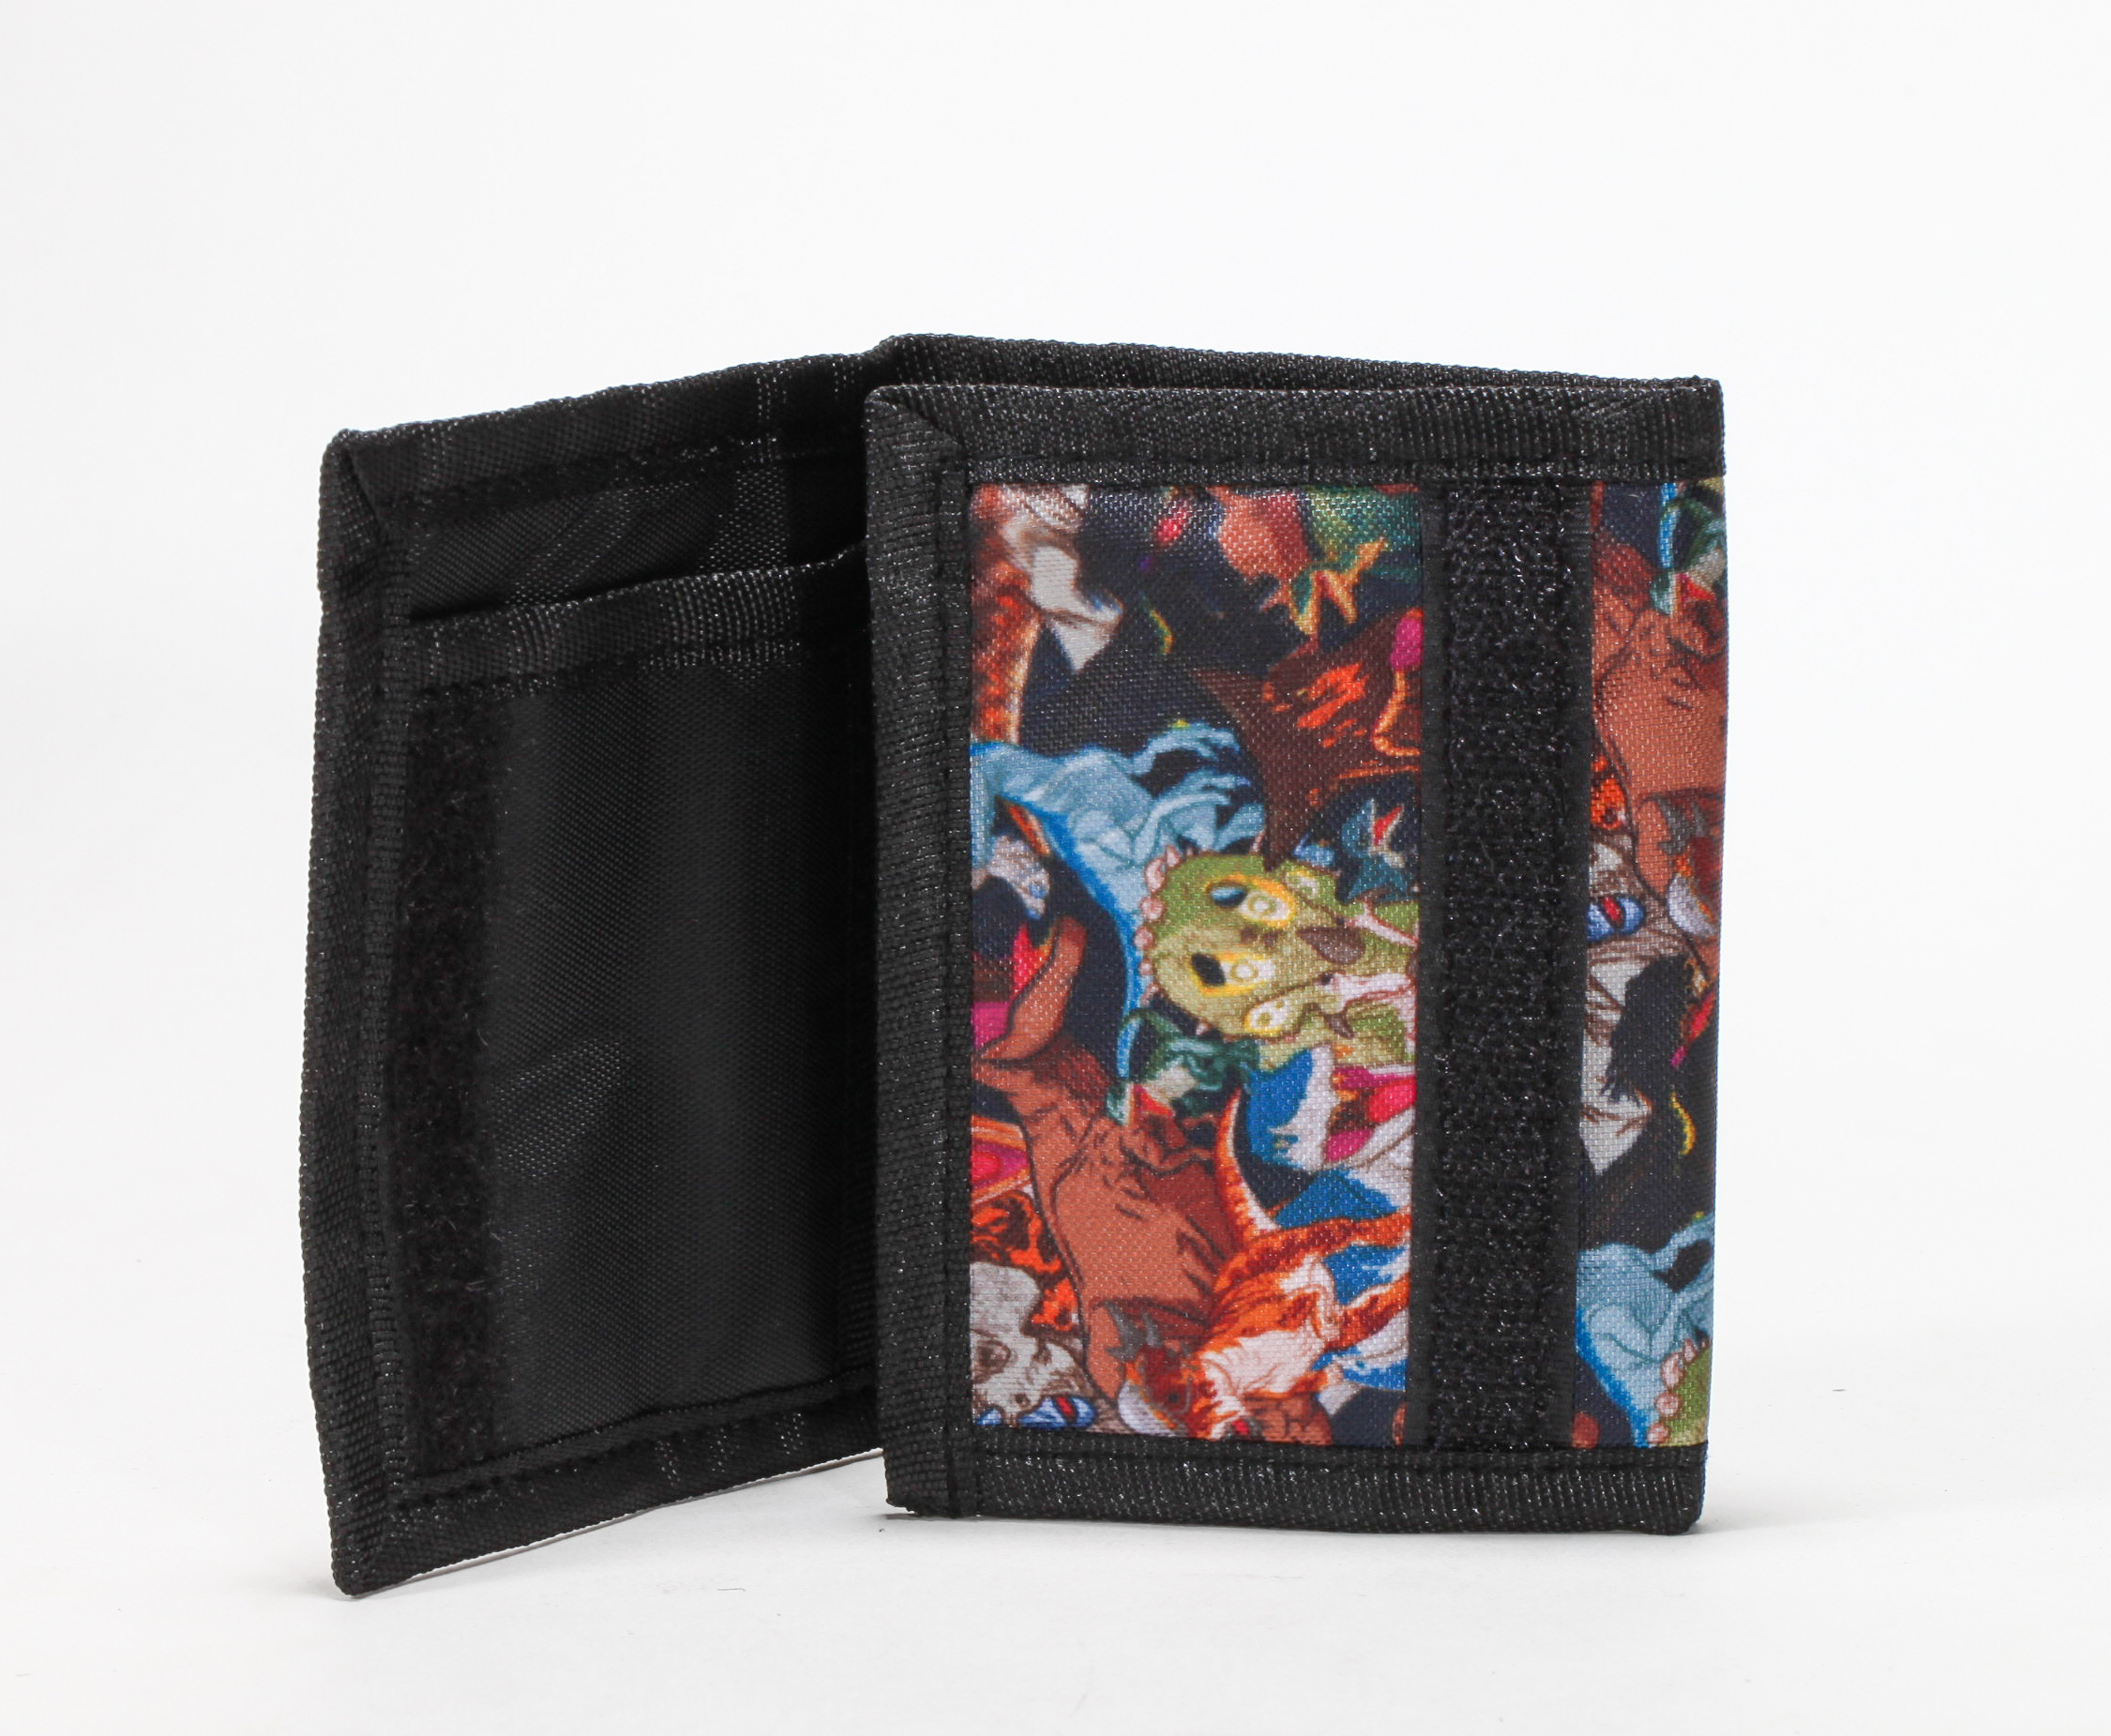 In 2021, Two Types of Wallets Printed with Dinosaur Patterns Are Exquisite And Portable